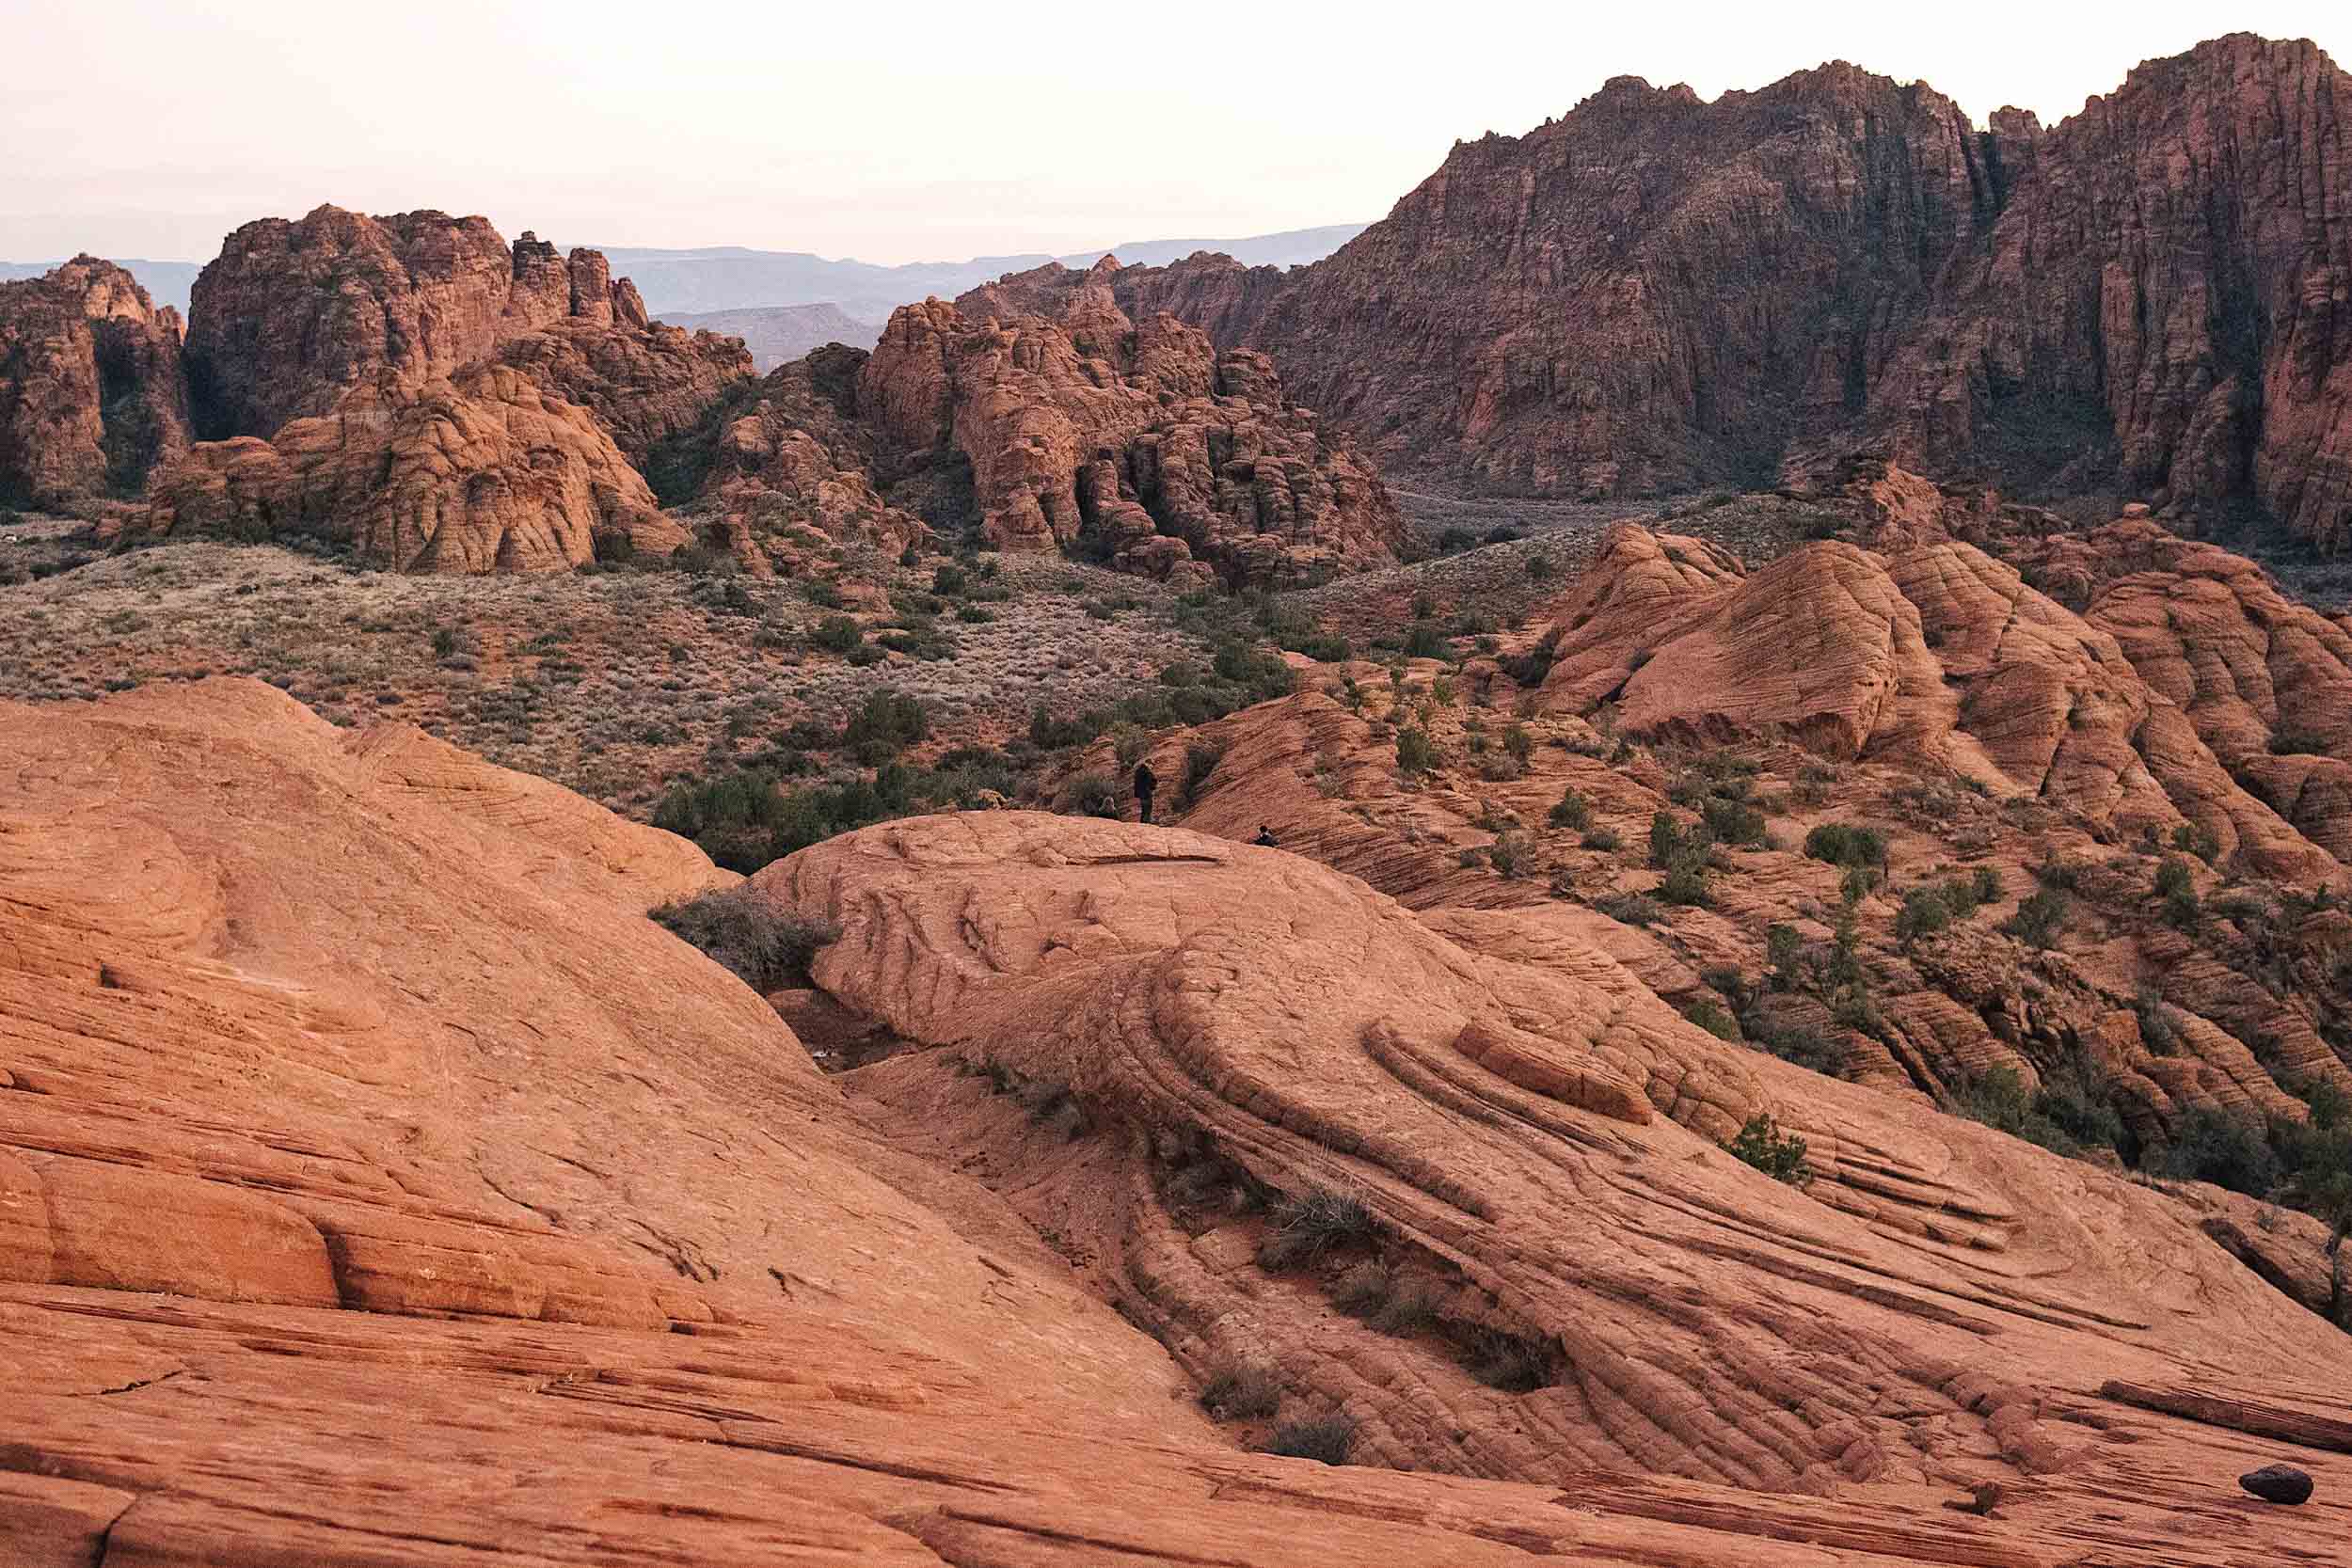 Snow Canyon in the winter - the perfect time to visit!